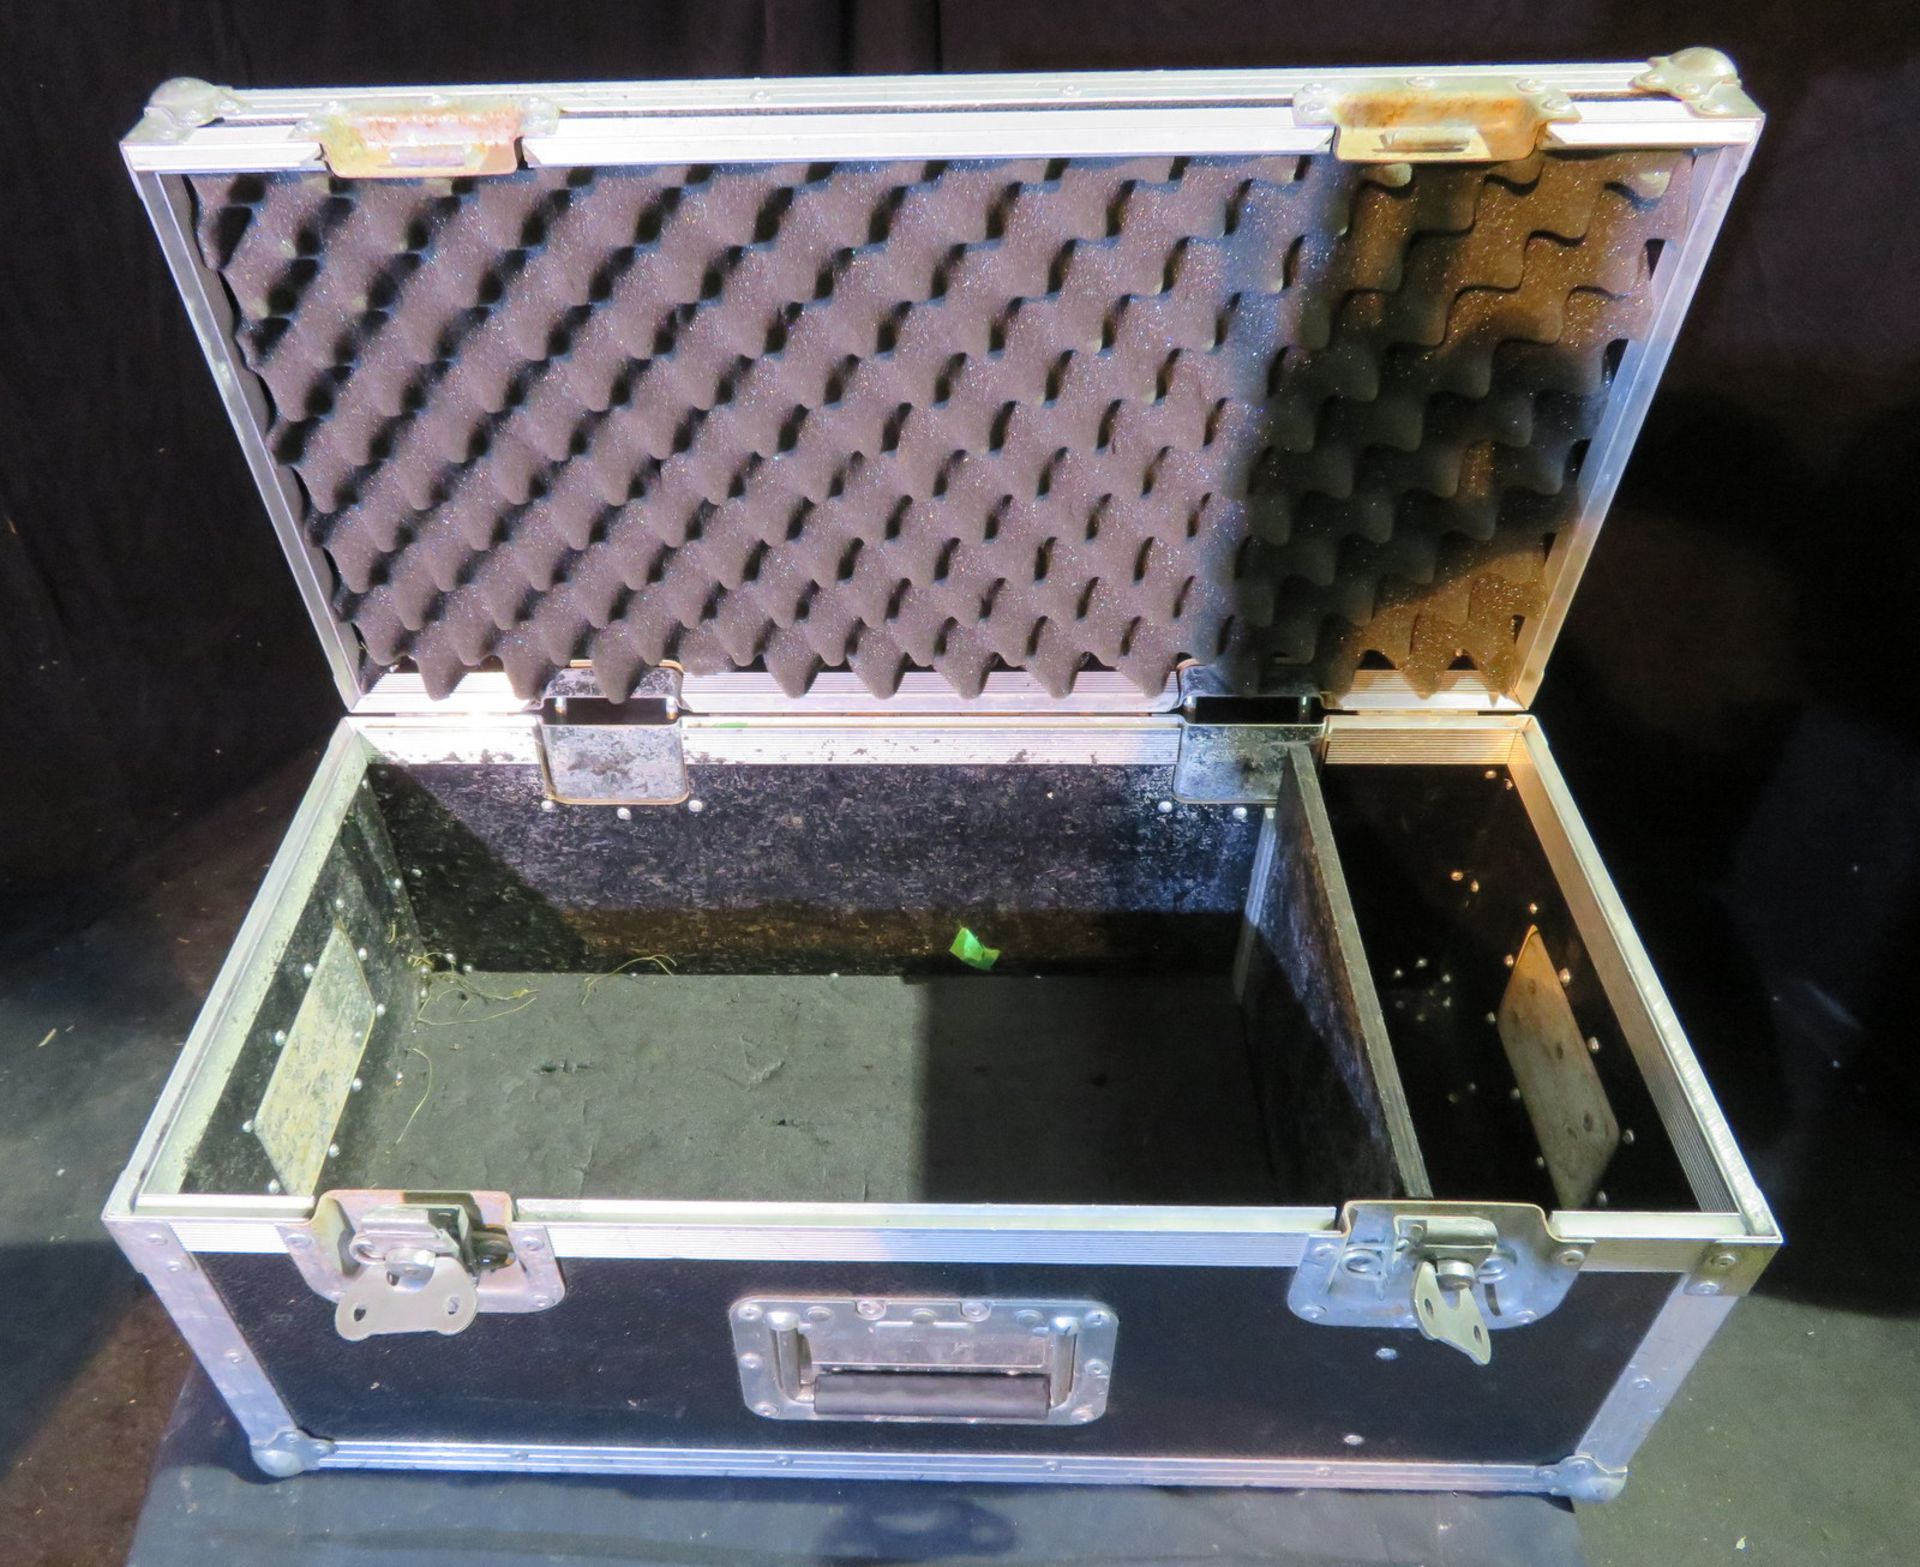 Small Flightcase internal dimensions: 59x28x19cm (LxDxH) with internal divider - Image 4 of 4